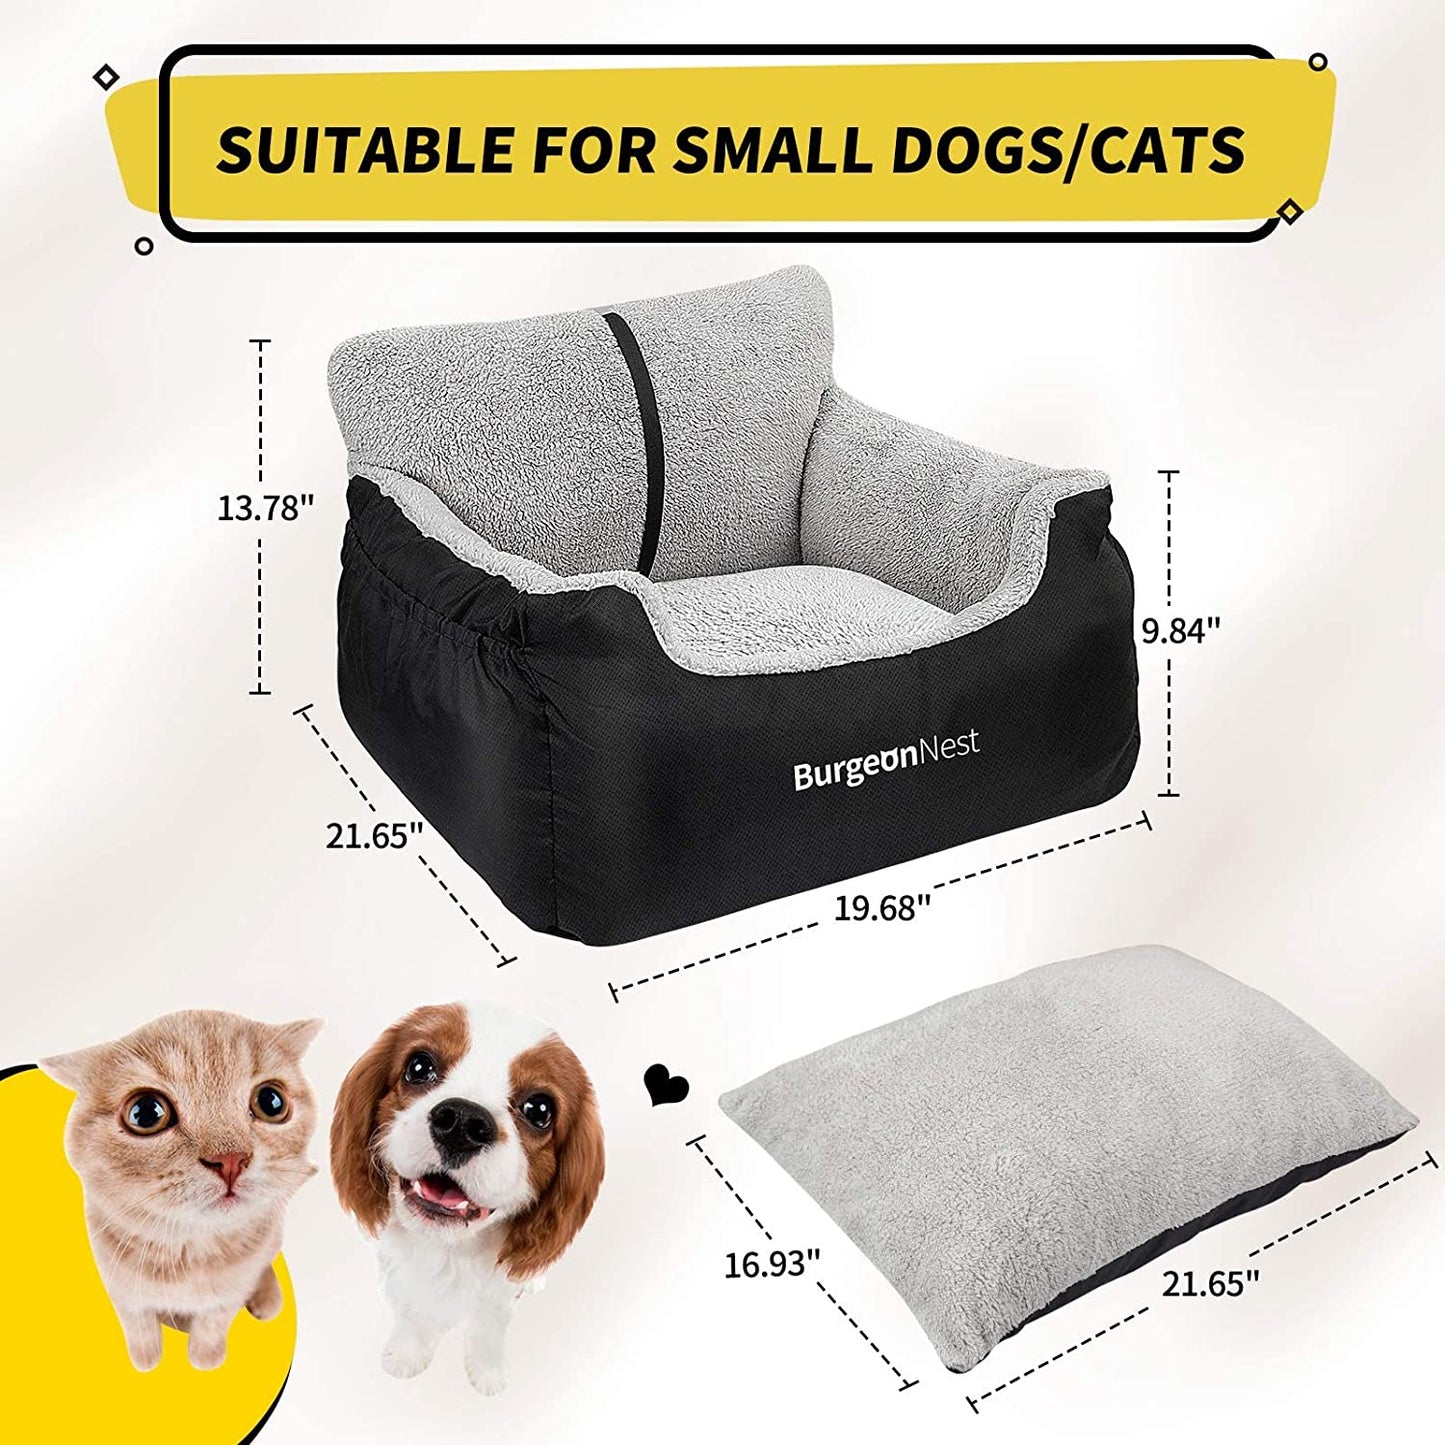 Burgeonnest Dog Car Seat for Small Dogs, Fully Detachable and Washable Dog Carseats Small under 25, Soft Dog Booster Seats with Storage Pockets and Clip-On Leash Portable Dog Car Travel Carrier Bed